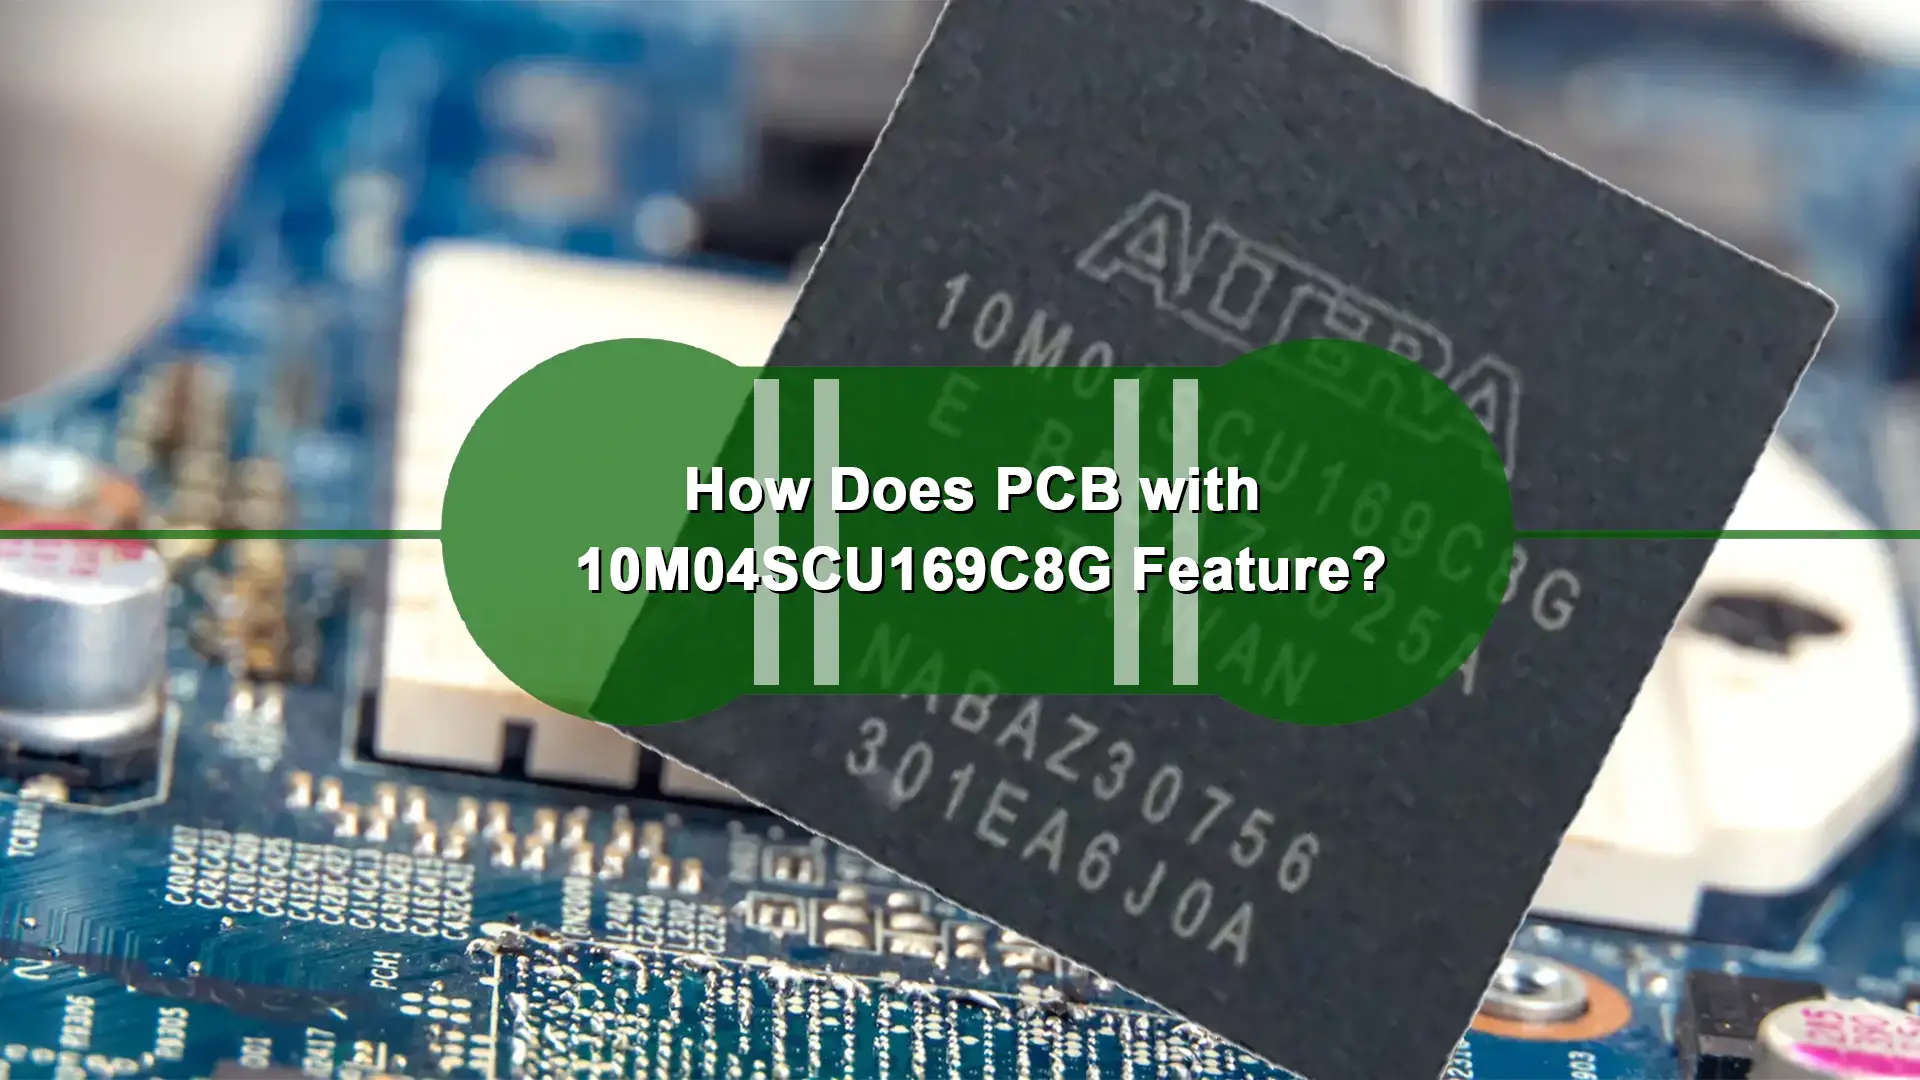 How Does PCB with 10M04SCU169C8G Feature?